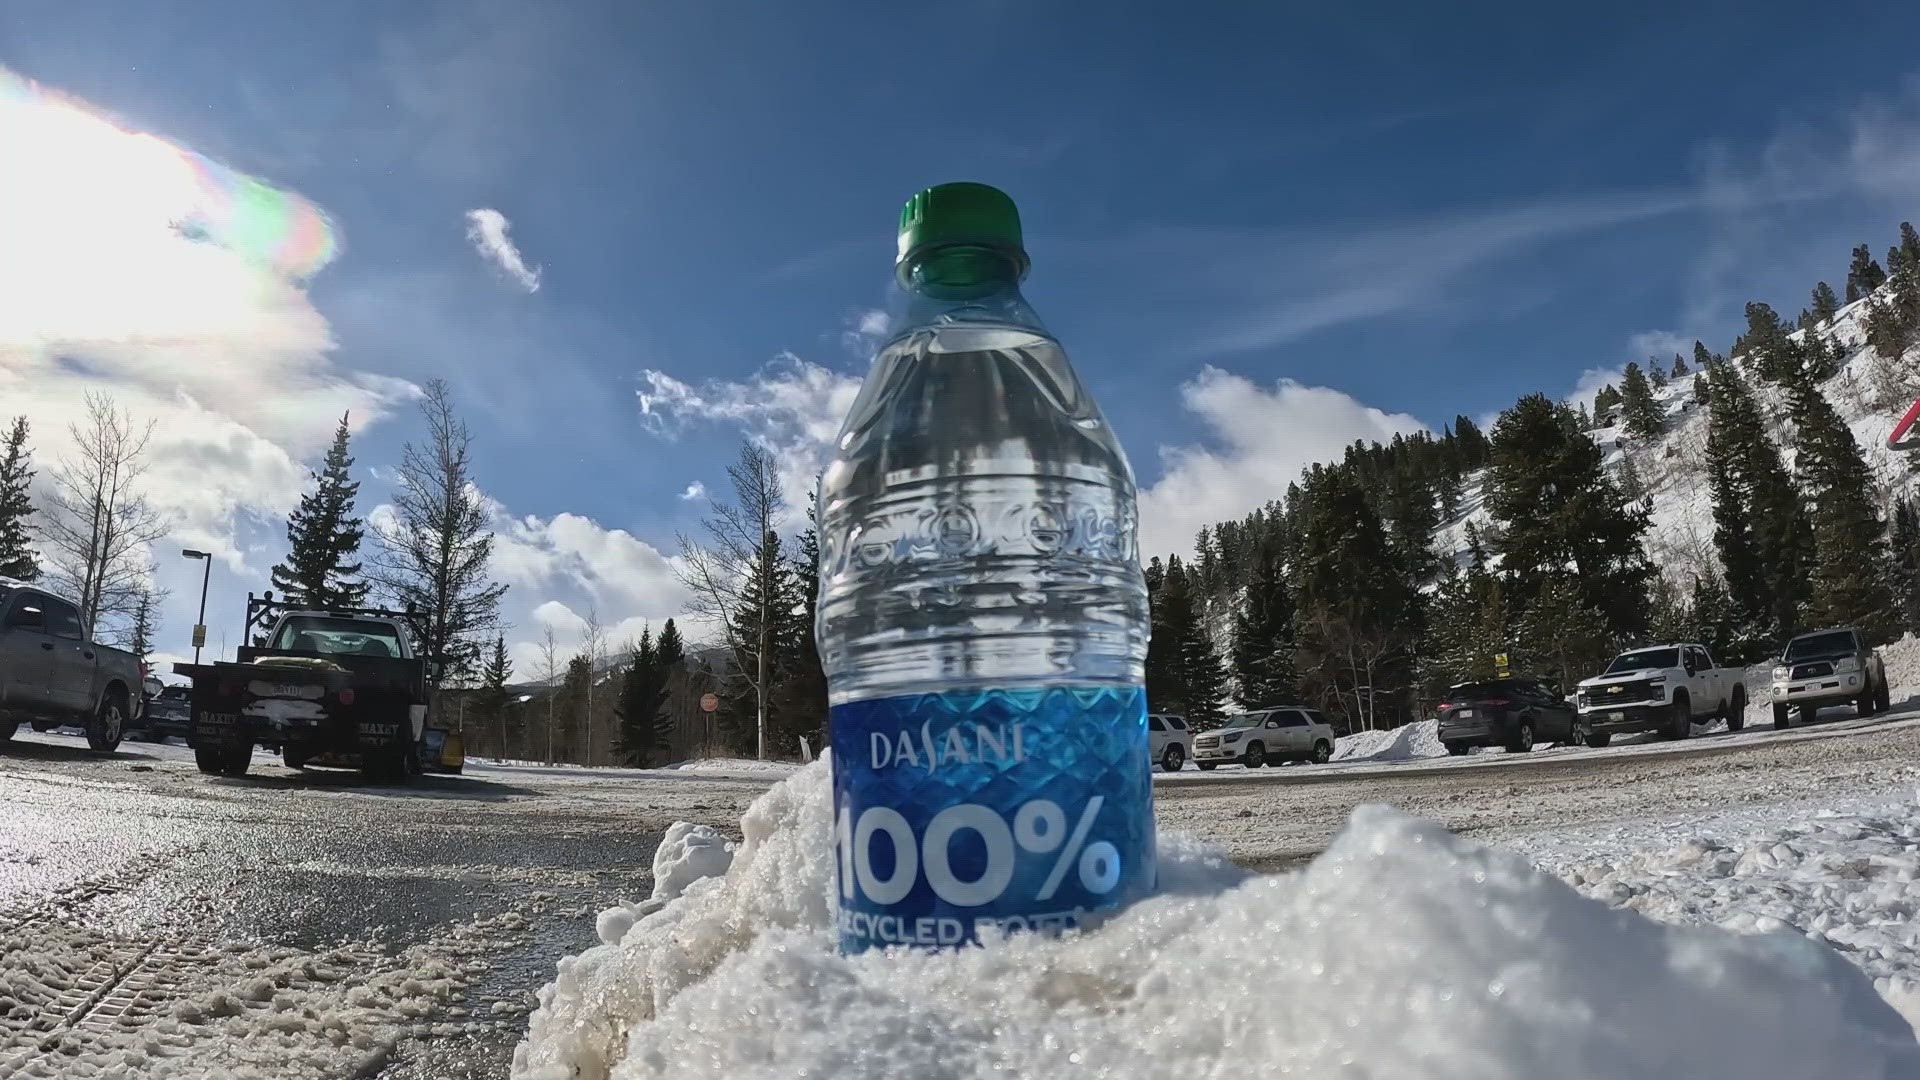 By July 1, 2024, the town of Breckenridge will be phase out single-use water bottles less than one gallon in size.